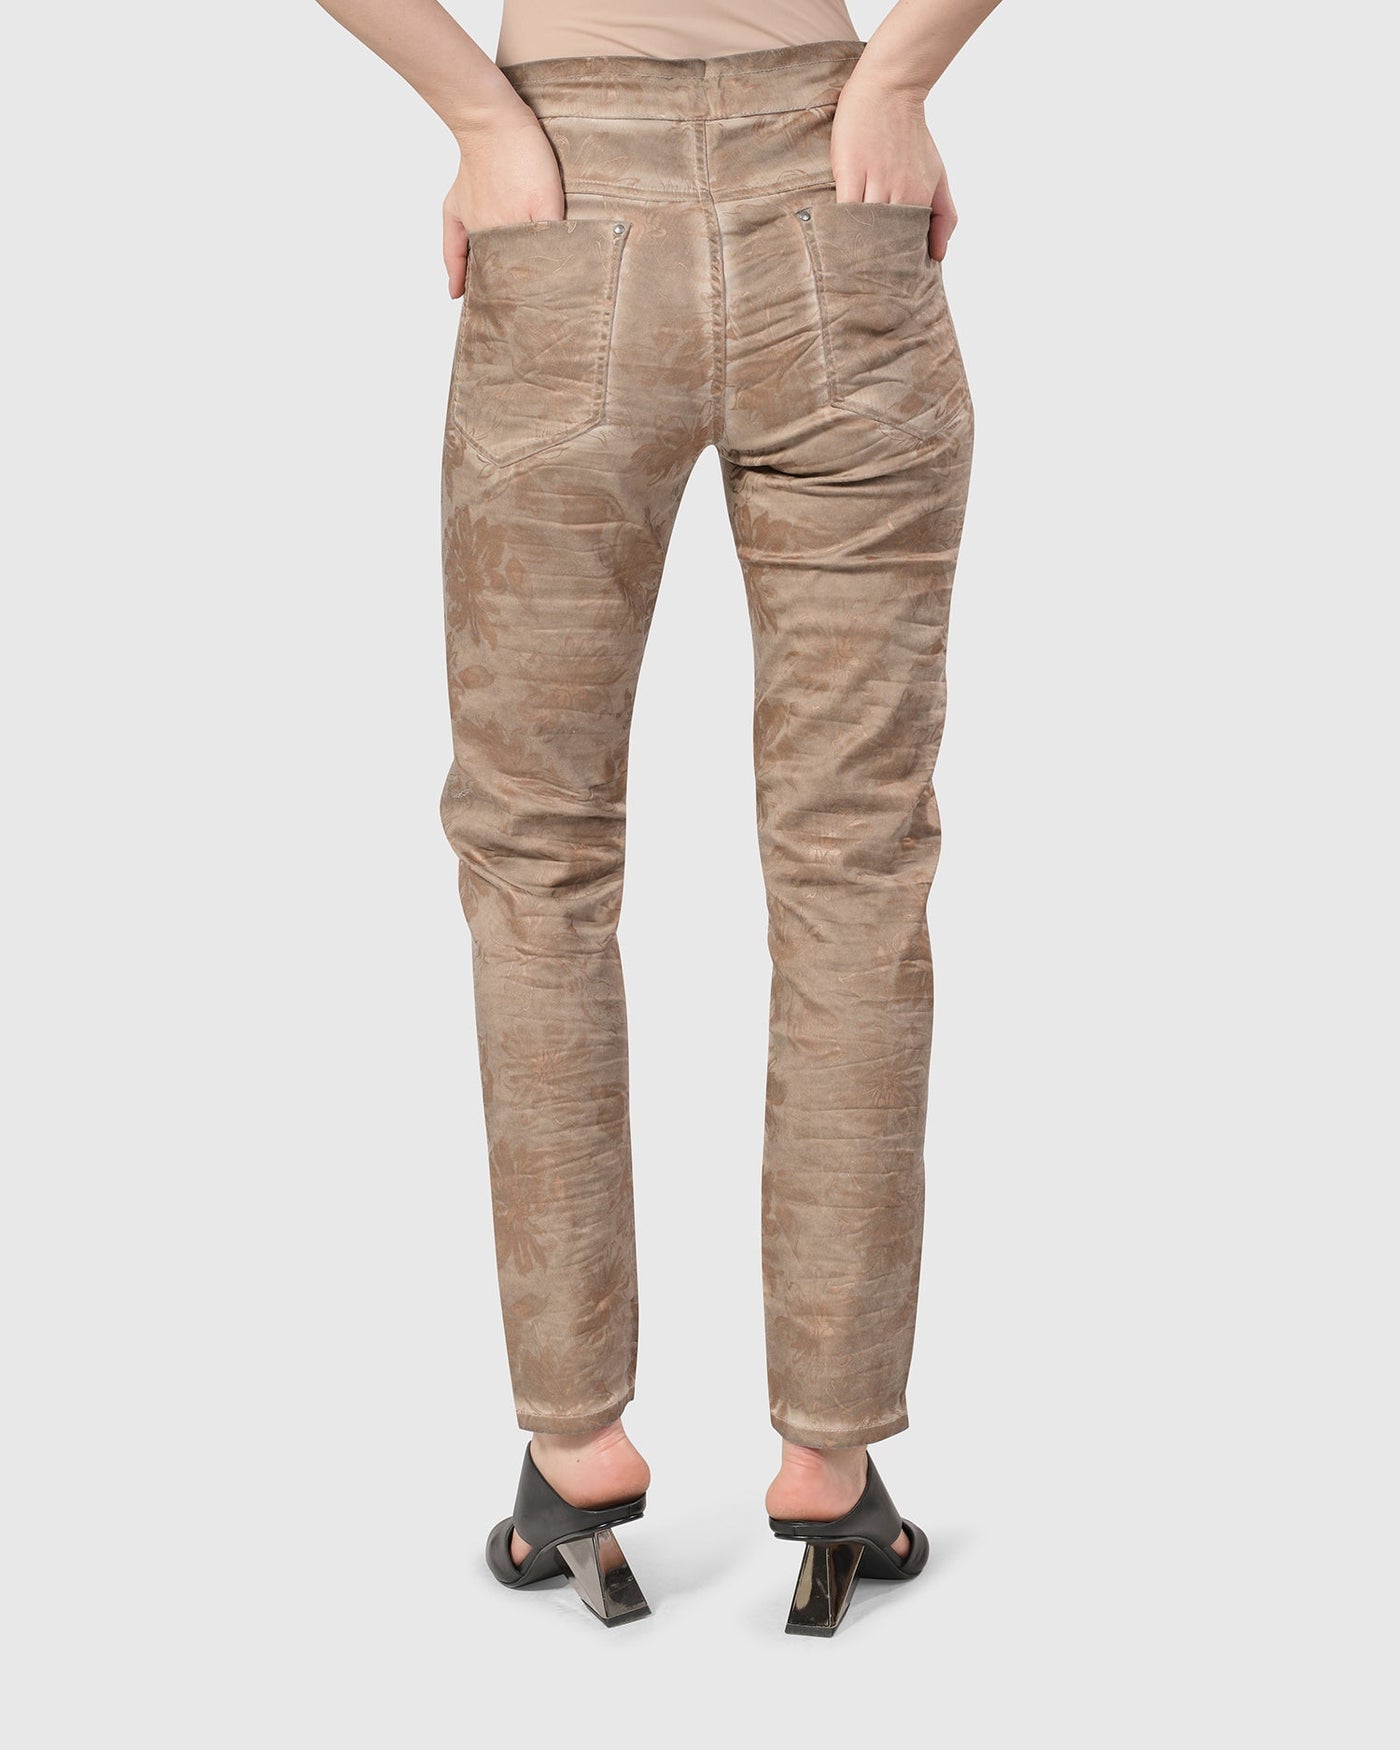 Floral Iconic Stretch Jeans, Gold Wash